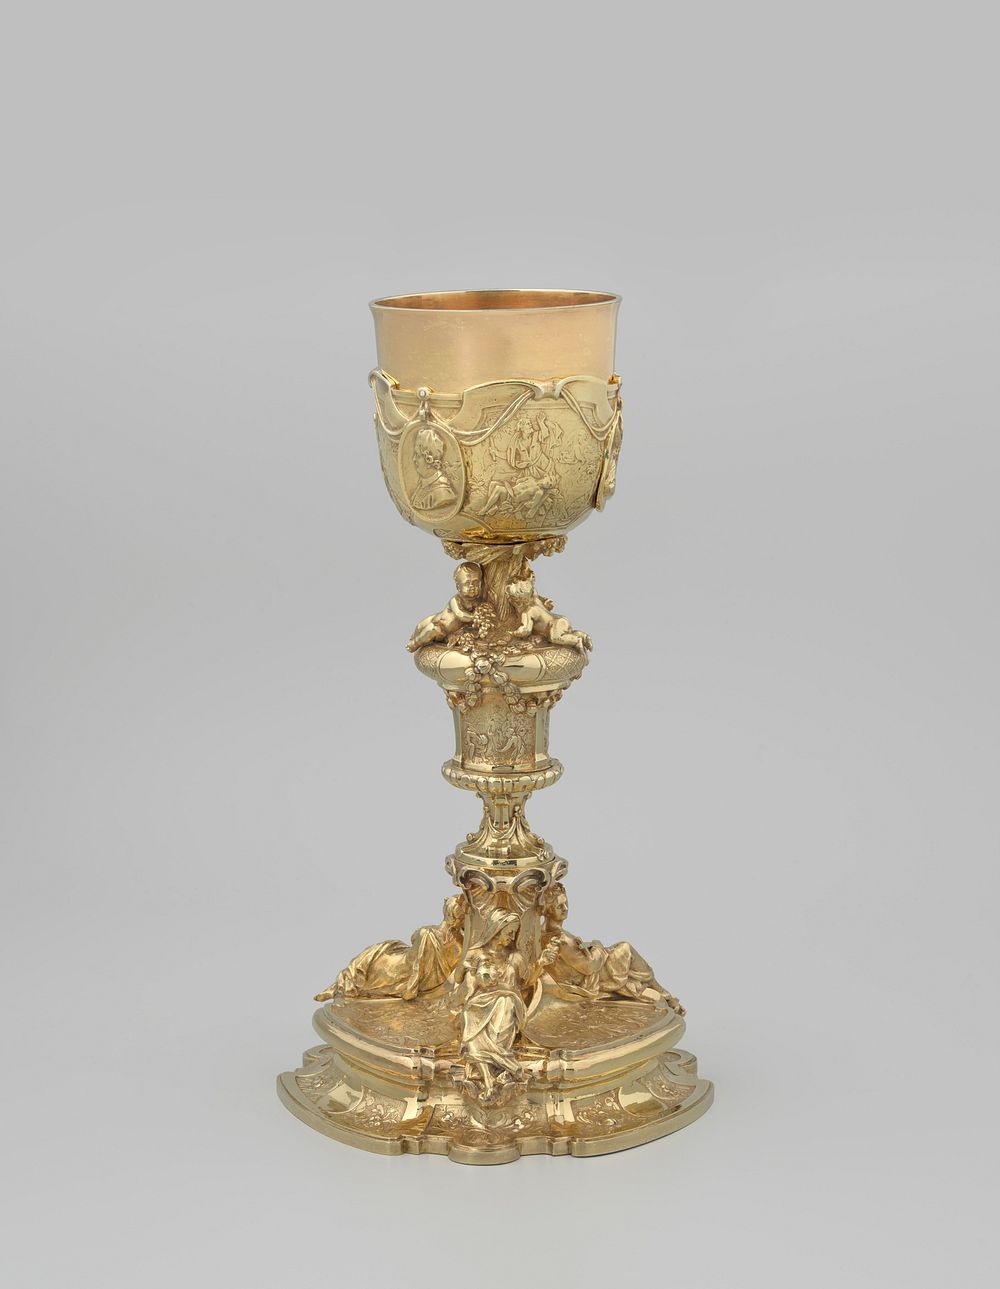 Chalice, paten and spoon (1723) by Jan Anthonie Le Pies